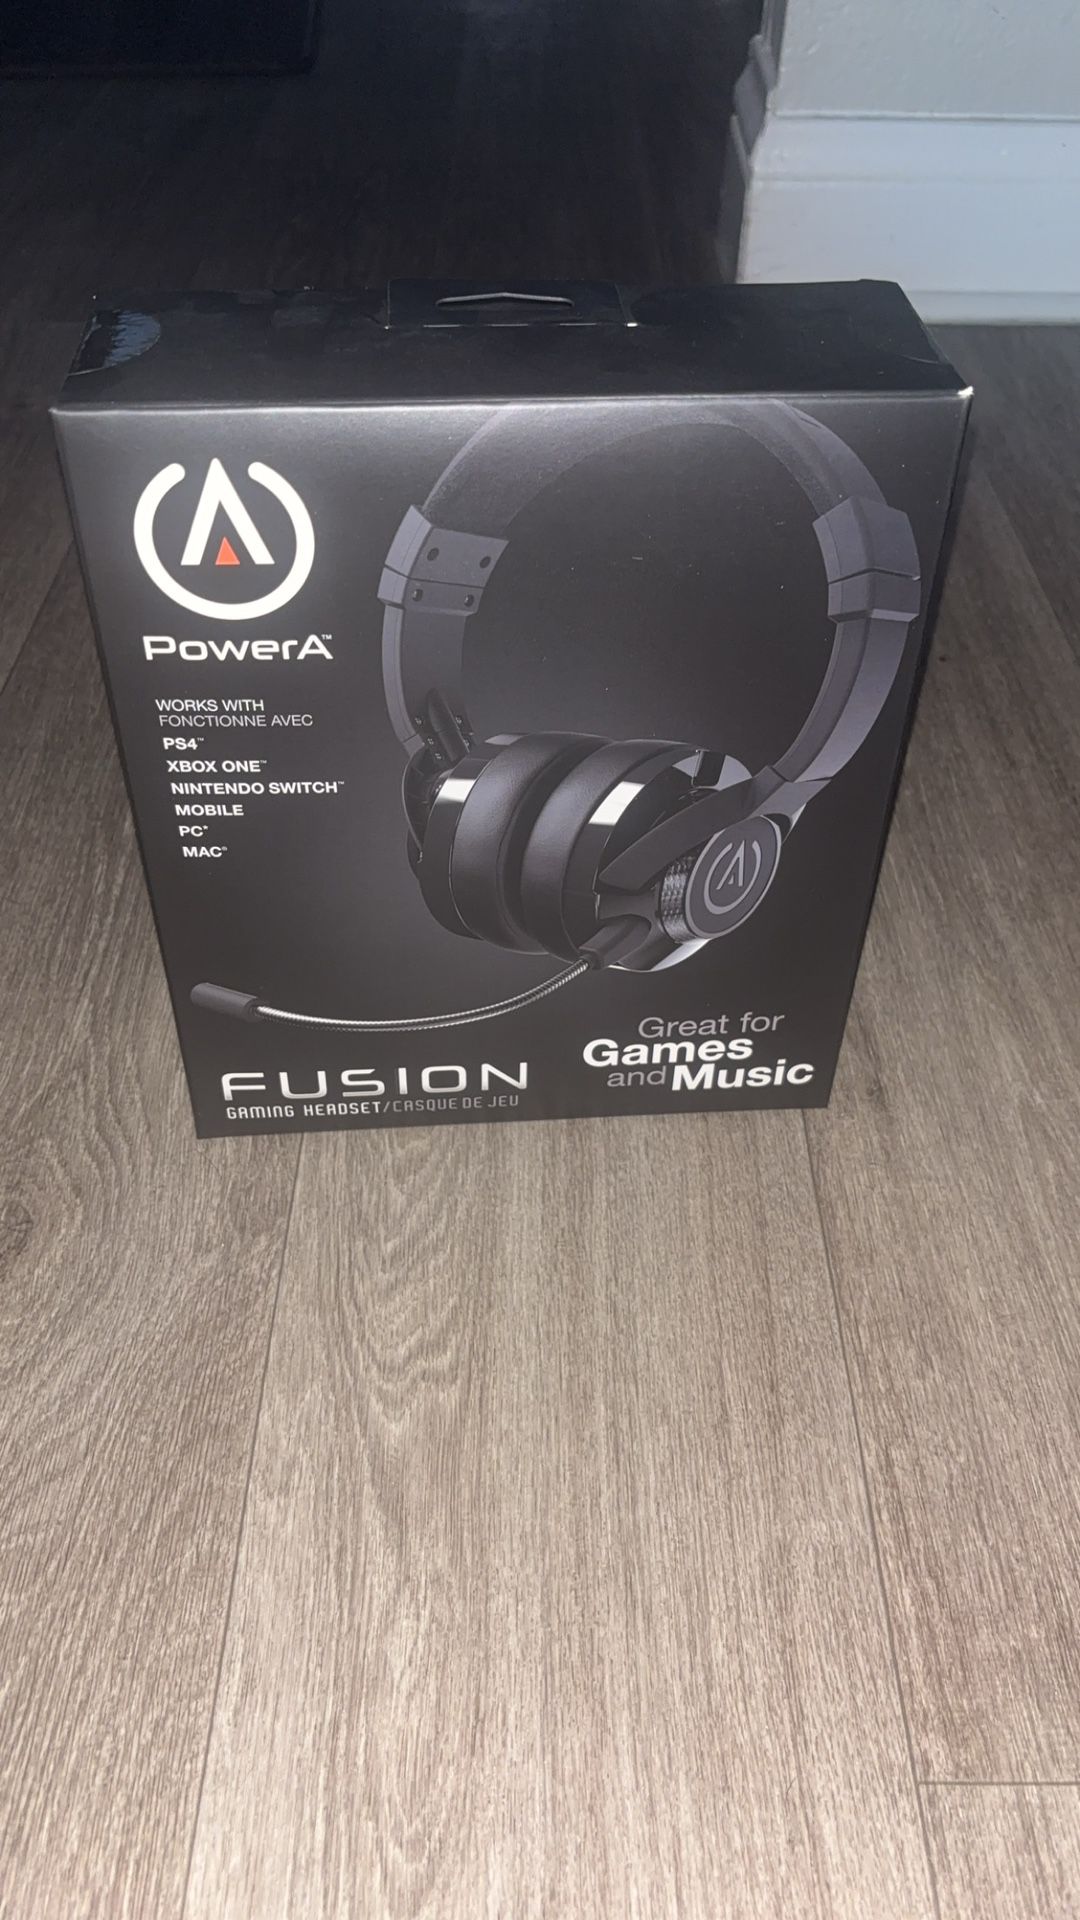 Fusion Power A Gaming HeadSet 